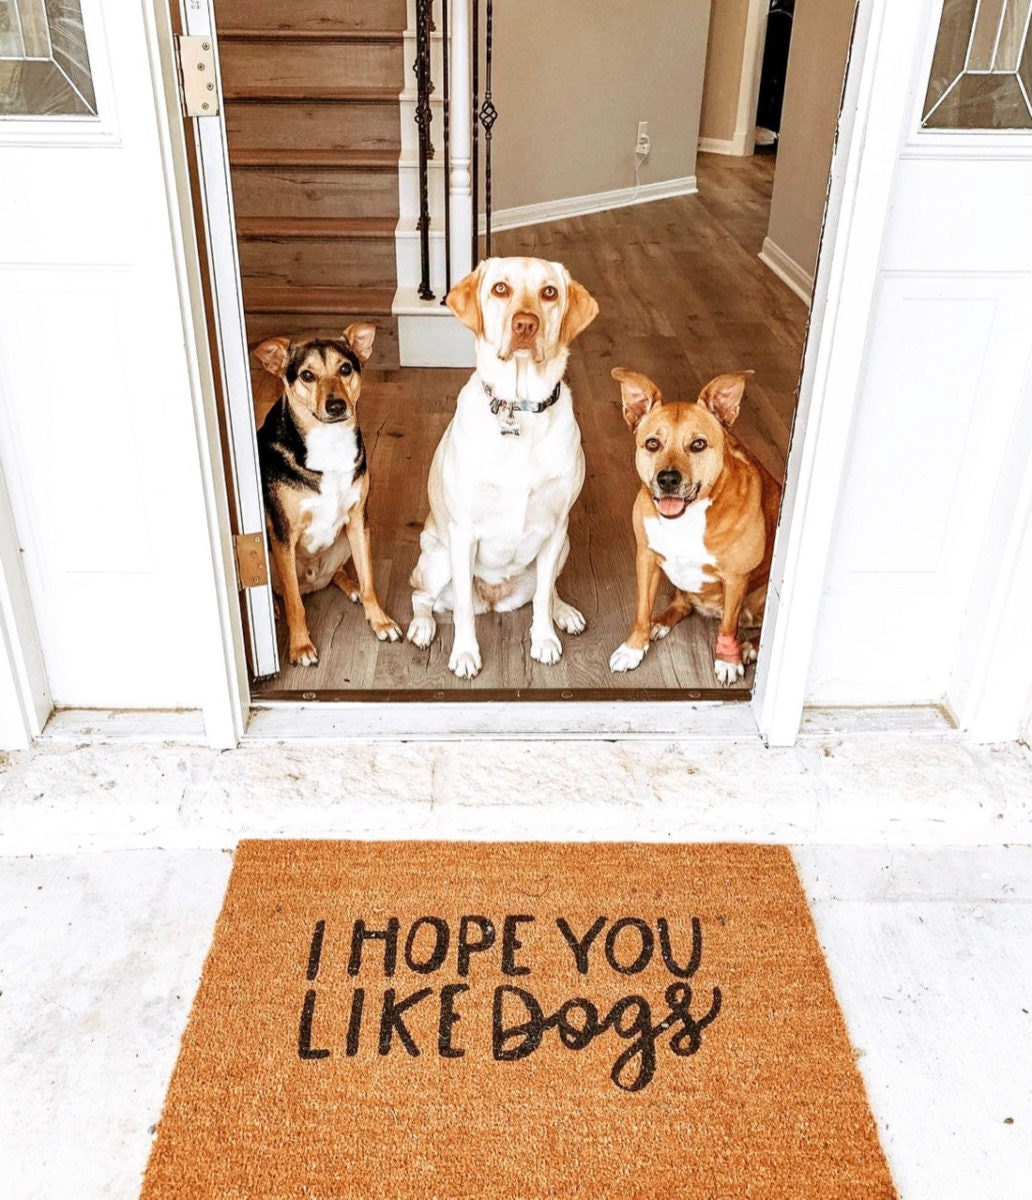 "I Hope You Like Dogs" doormat from The Sycamore House